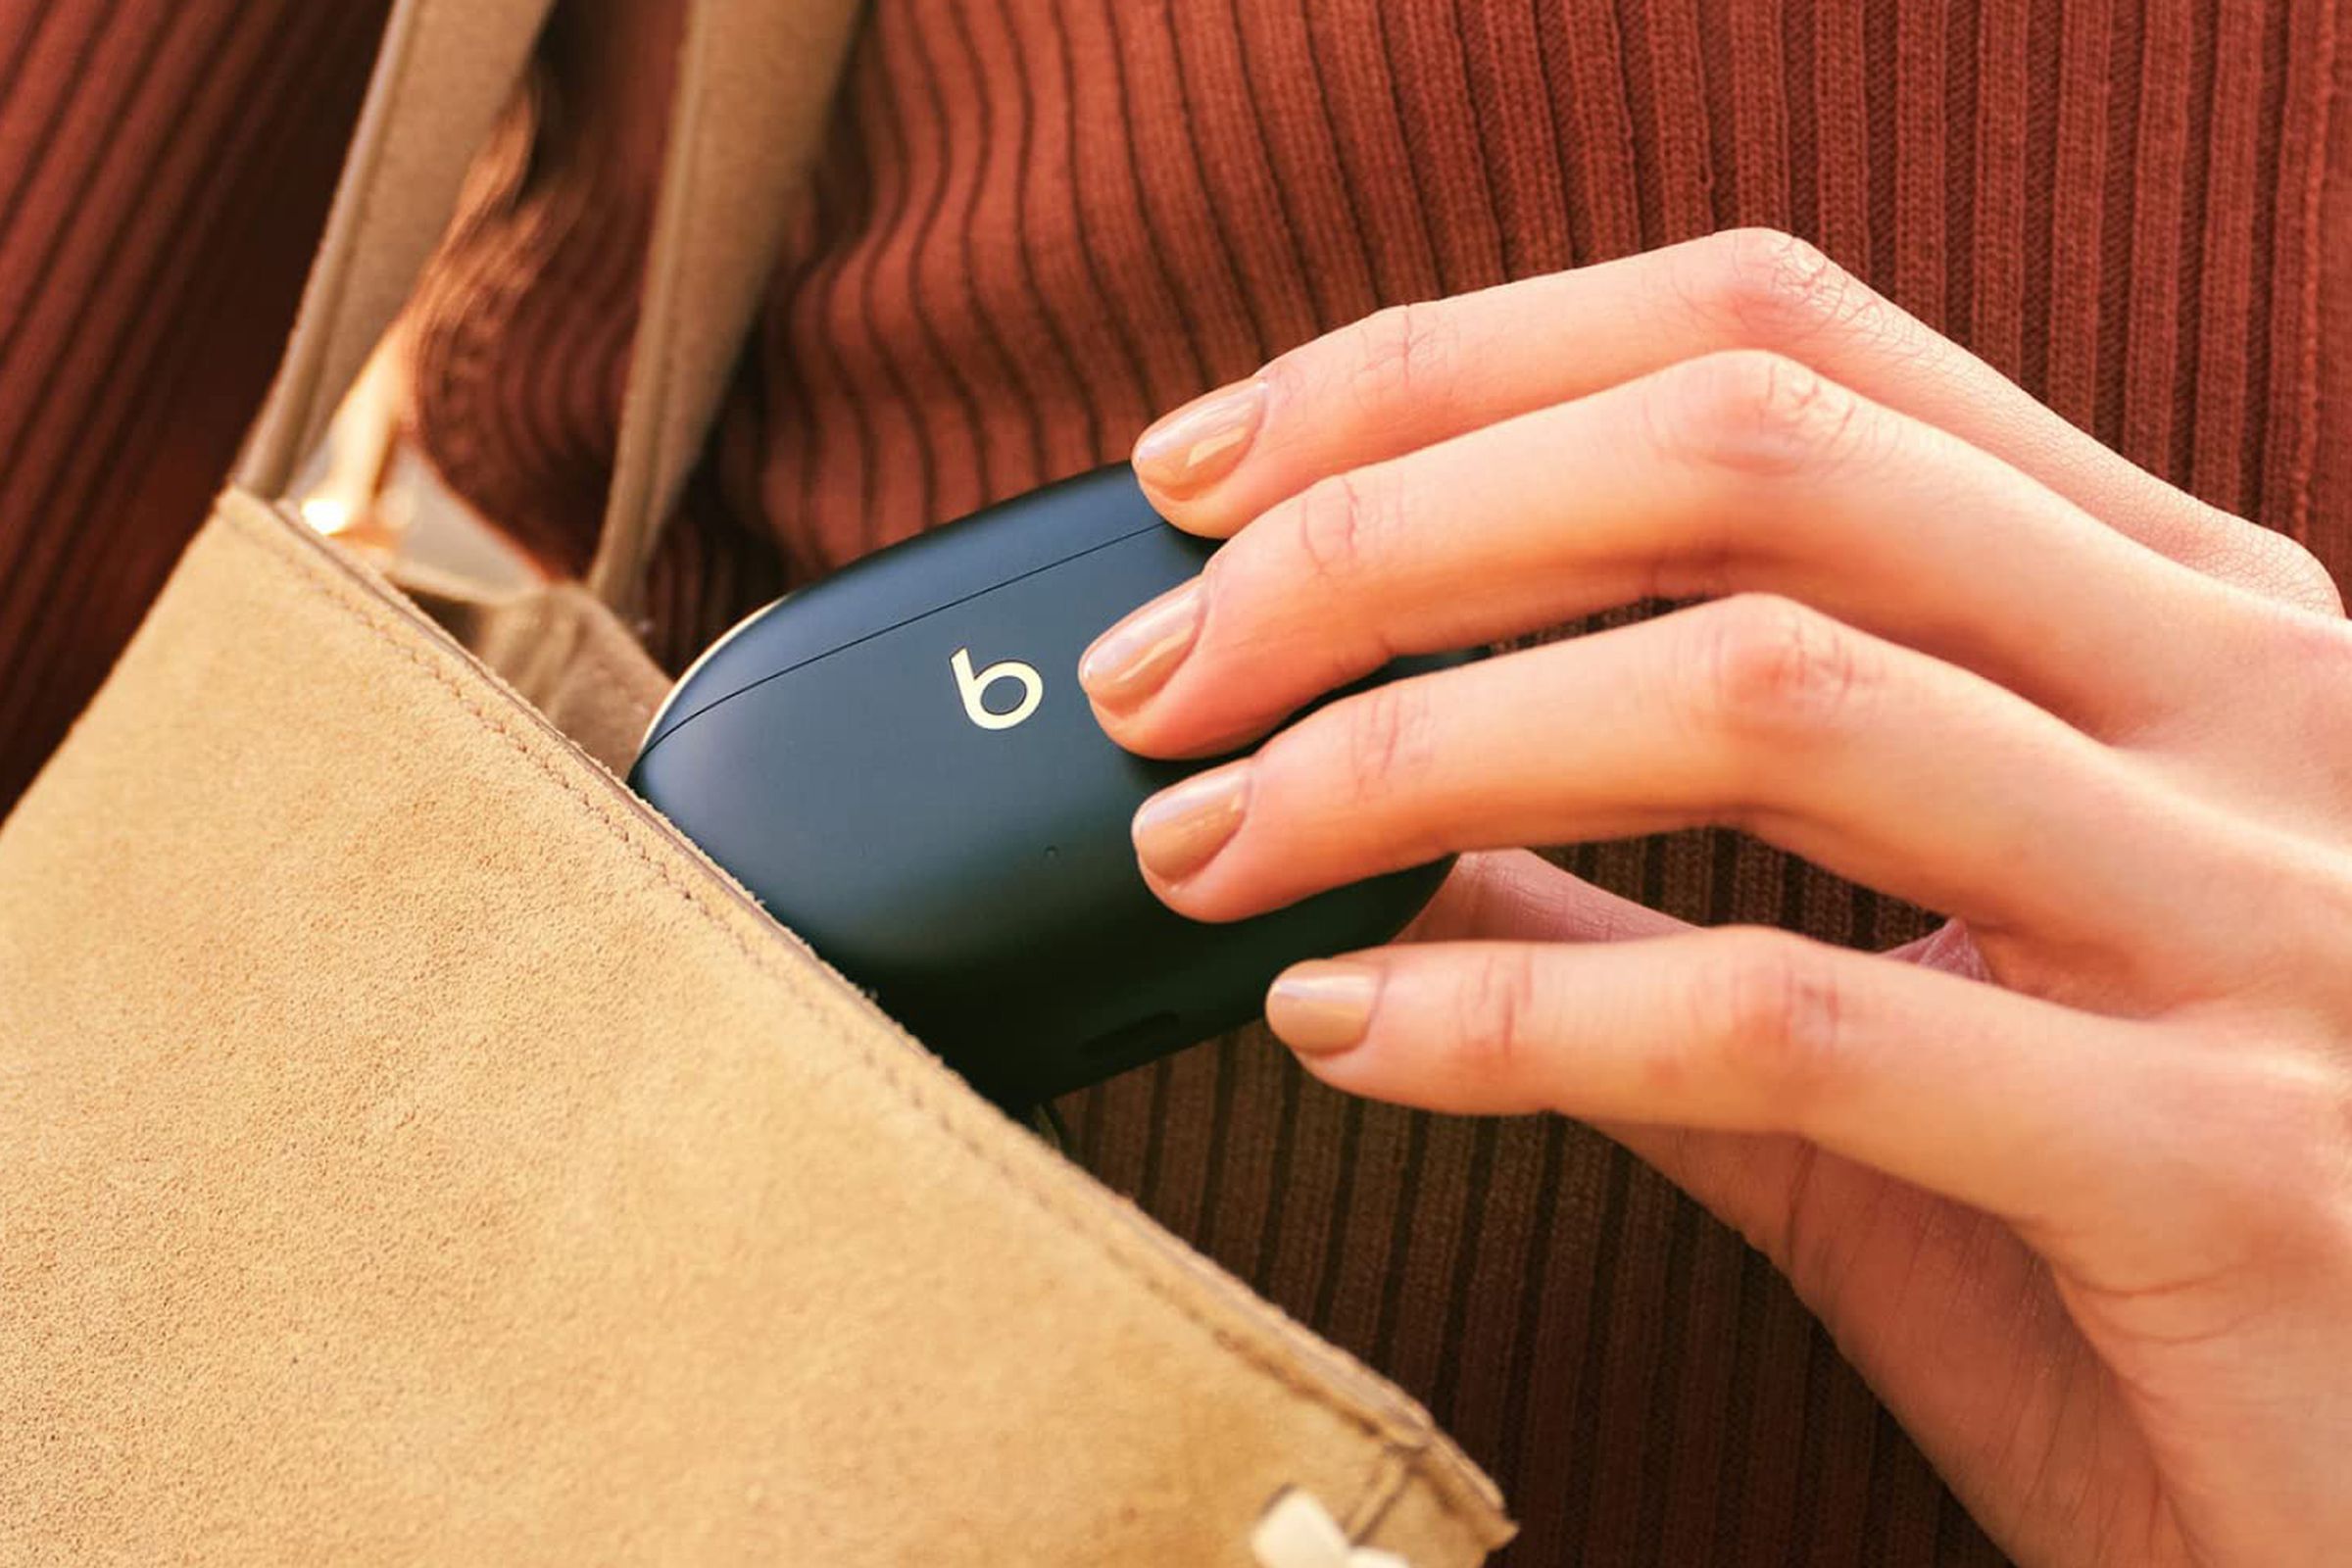 A close-up image of a hand pulling a pair of the Beats Studio Buds out of a purse.